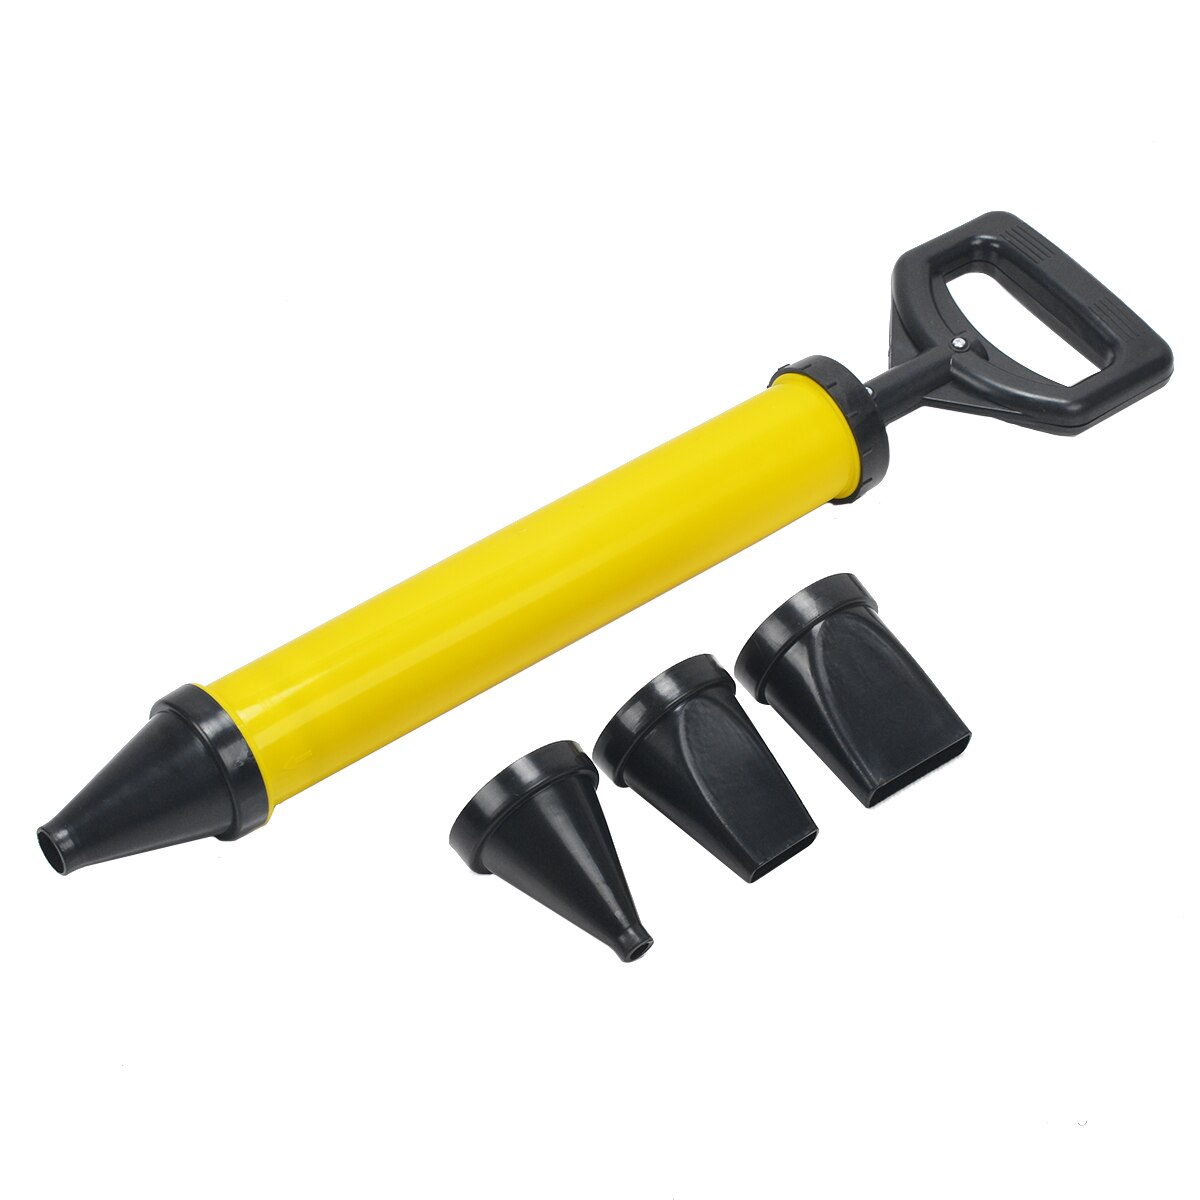 Mayitr 1pc Stainless Steel Caulking Gun Pointing Brick Grouting Mortar Sprayer Applicator Tool for Cement lime 4 Nozzle